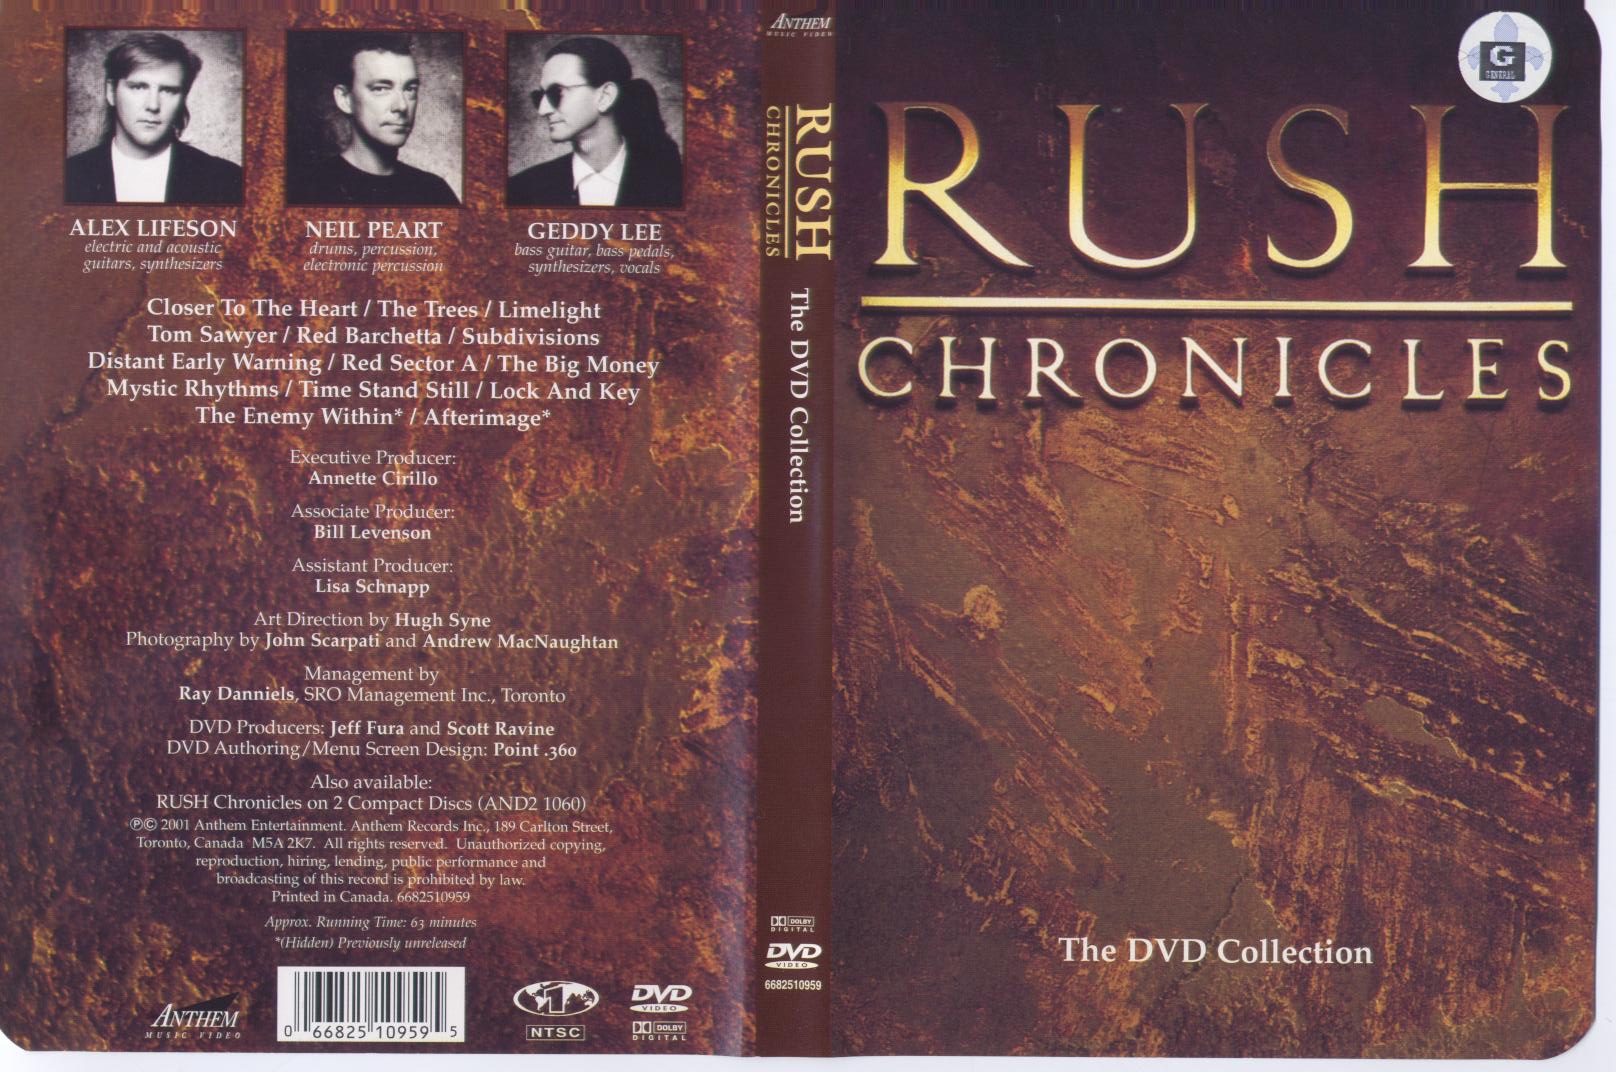 Jaquette DVD Rush chronicles collection